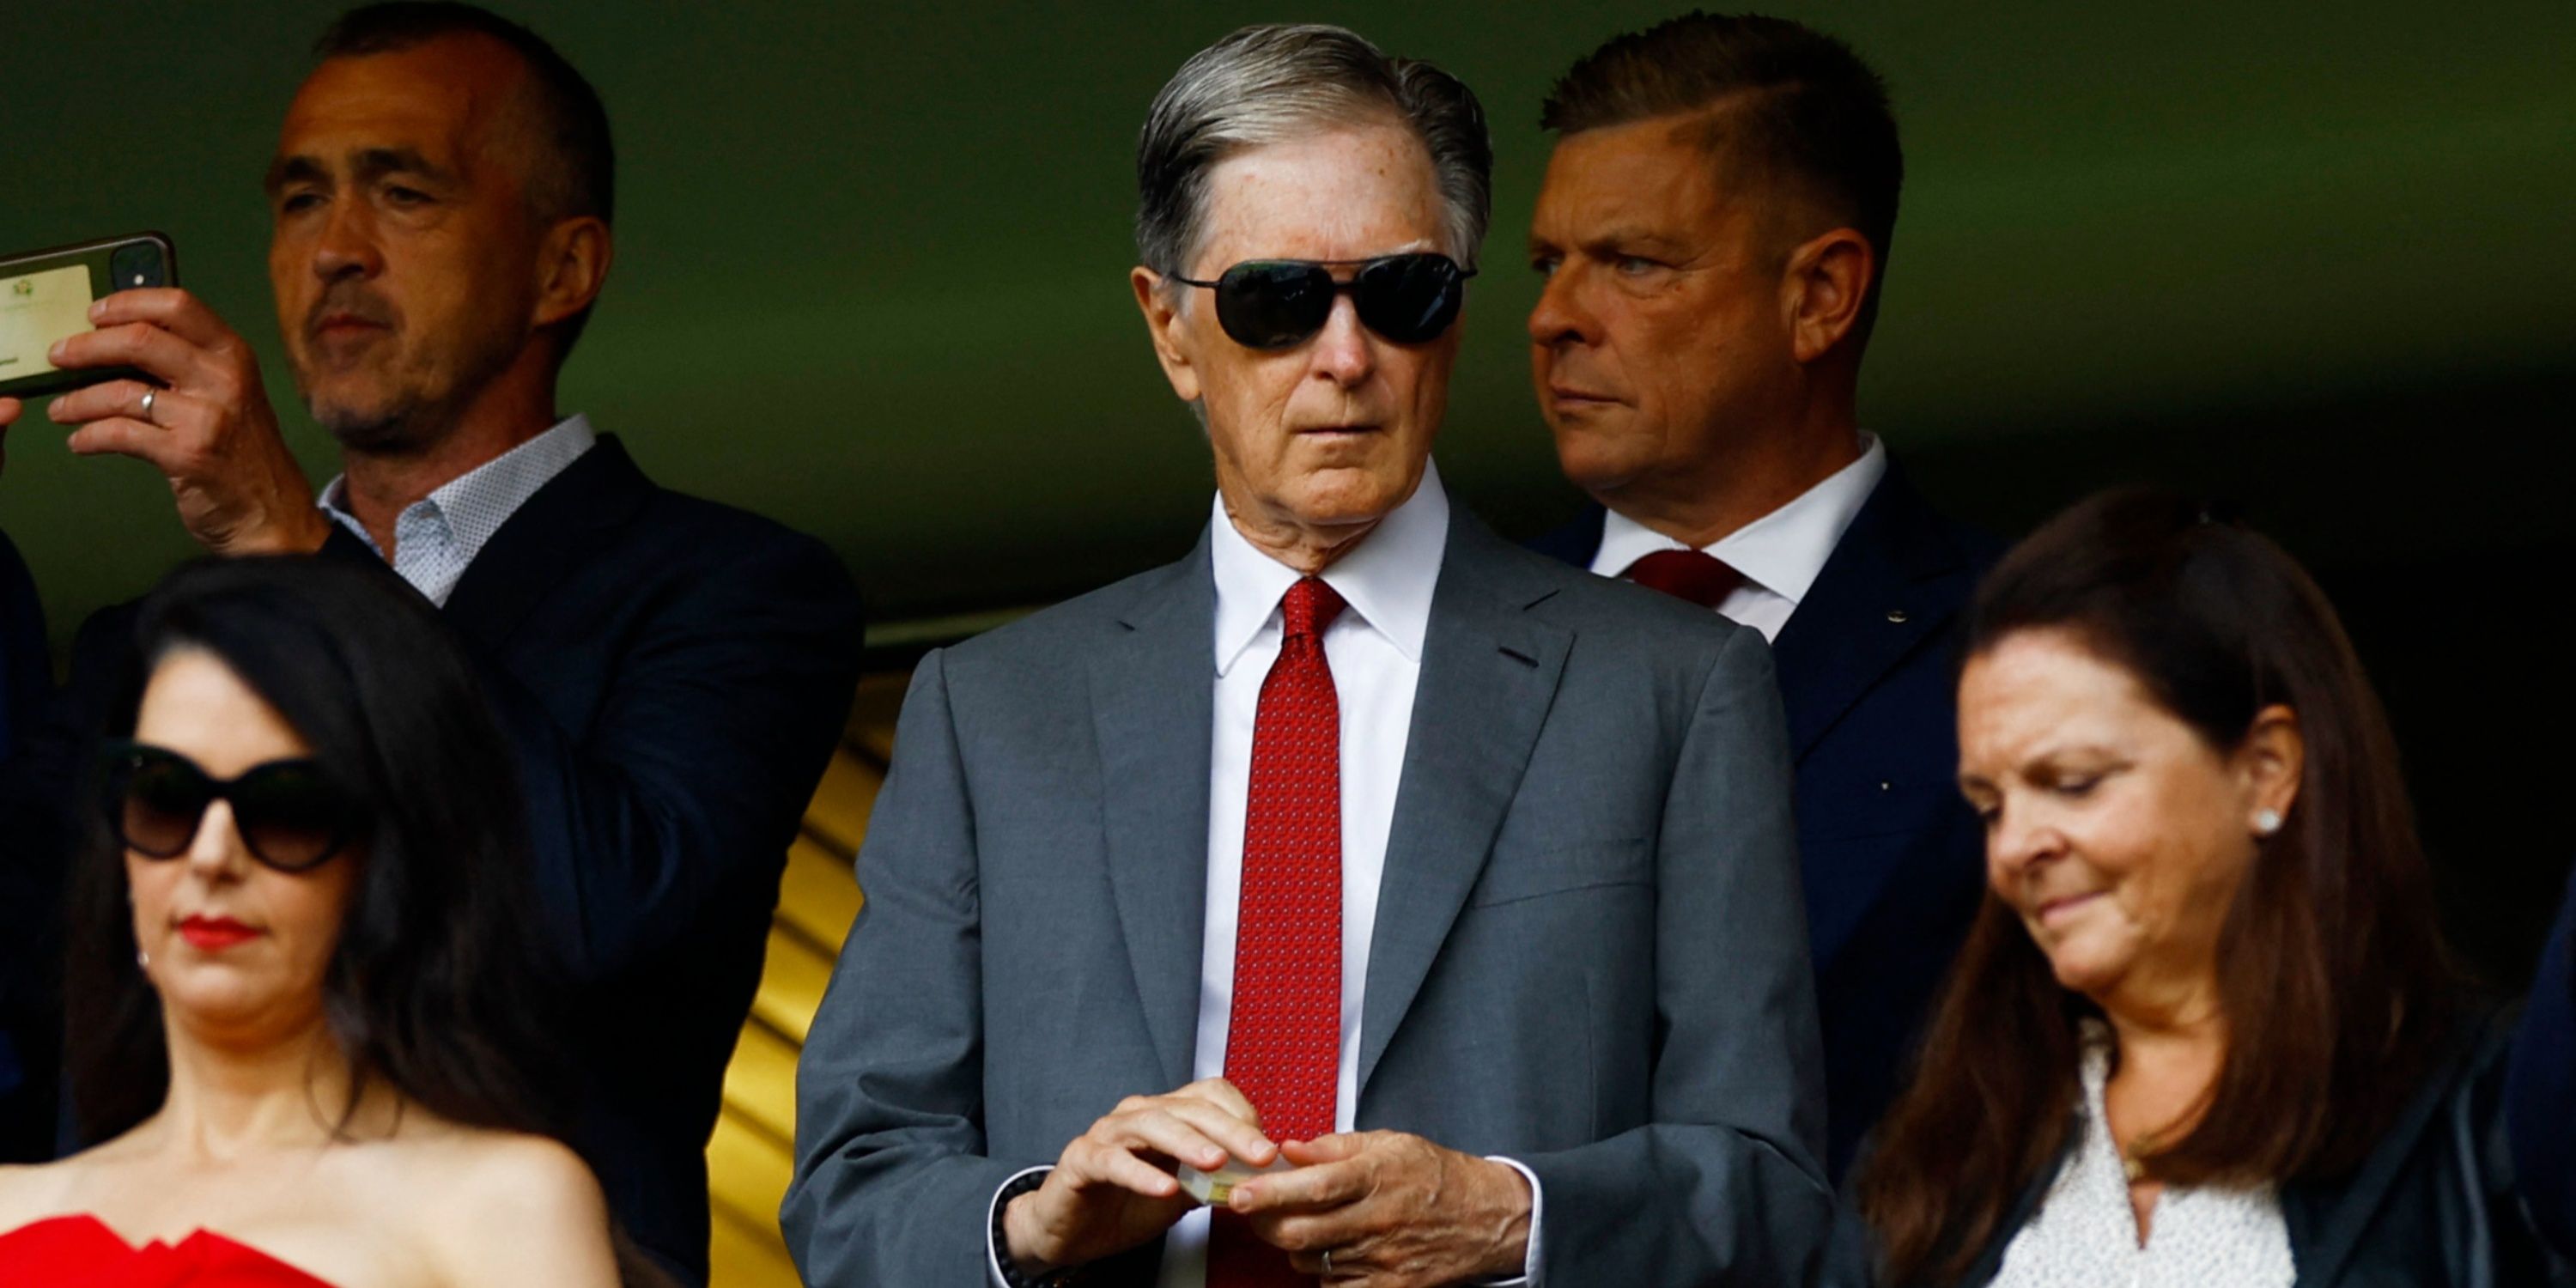 Liverpool owner John W. Henry watching on from the stands